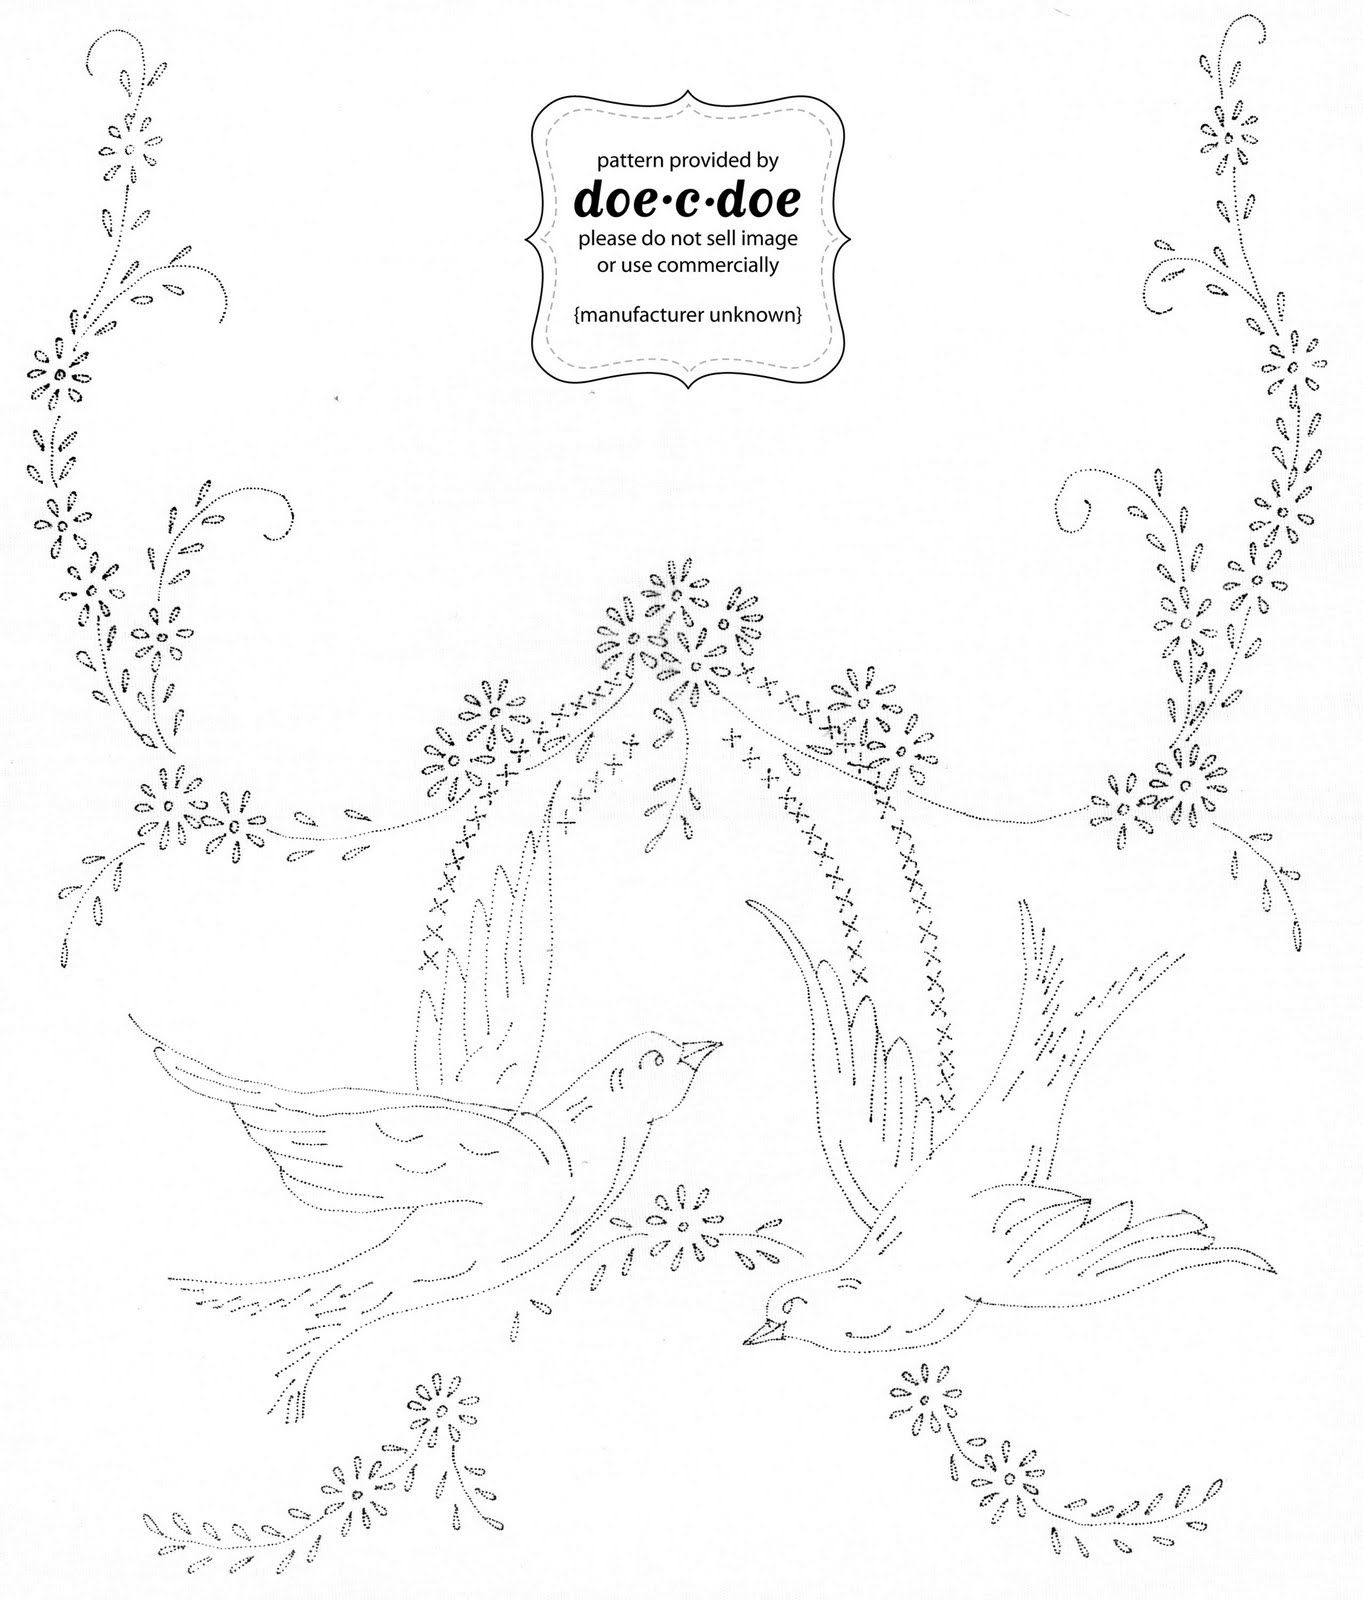 Free Printable Embroidery Patterns | Thursday, October 21, 2010 - Free Printable Embroidery Patterns